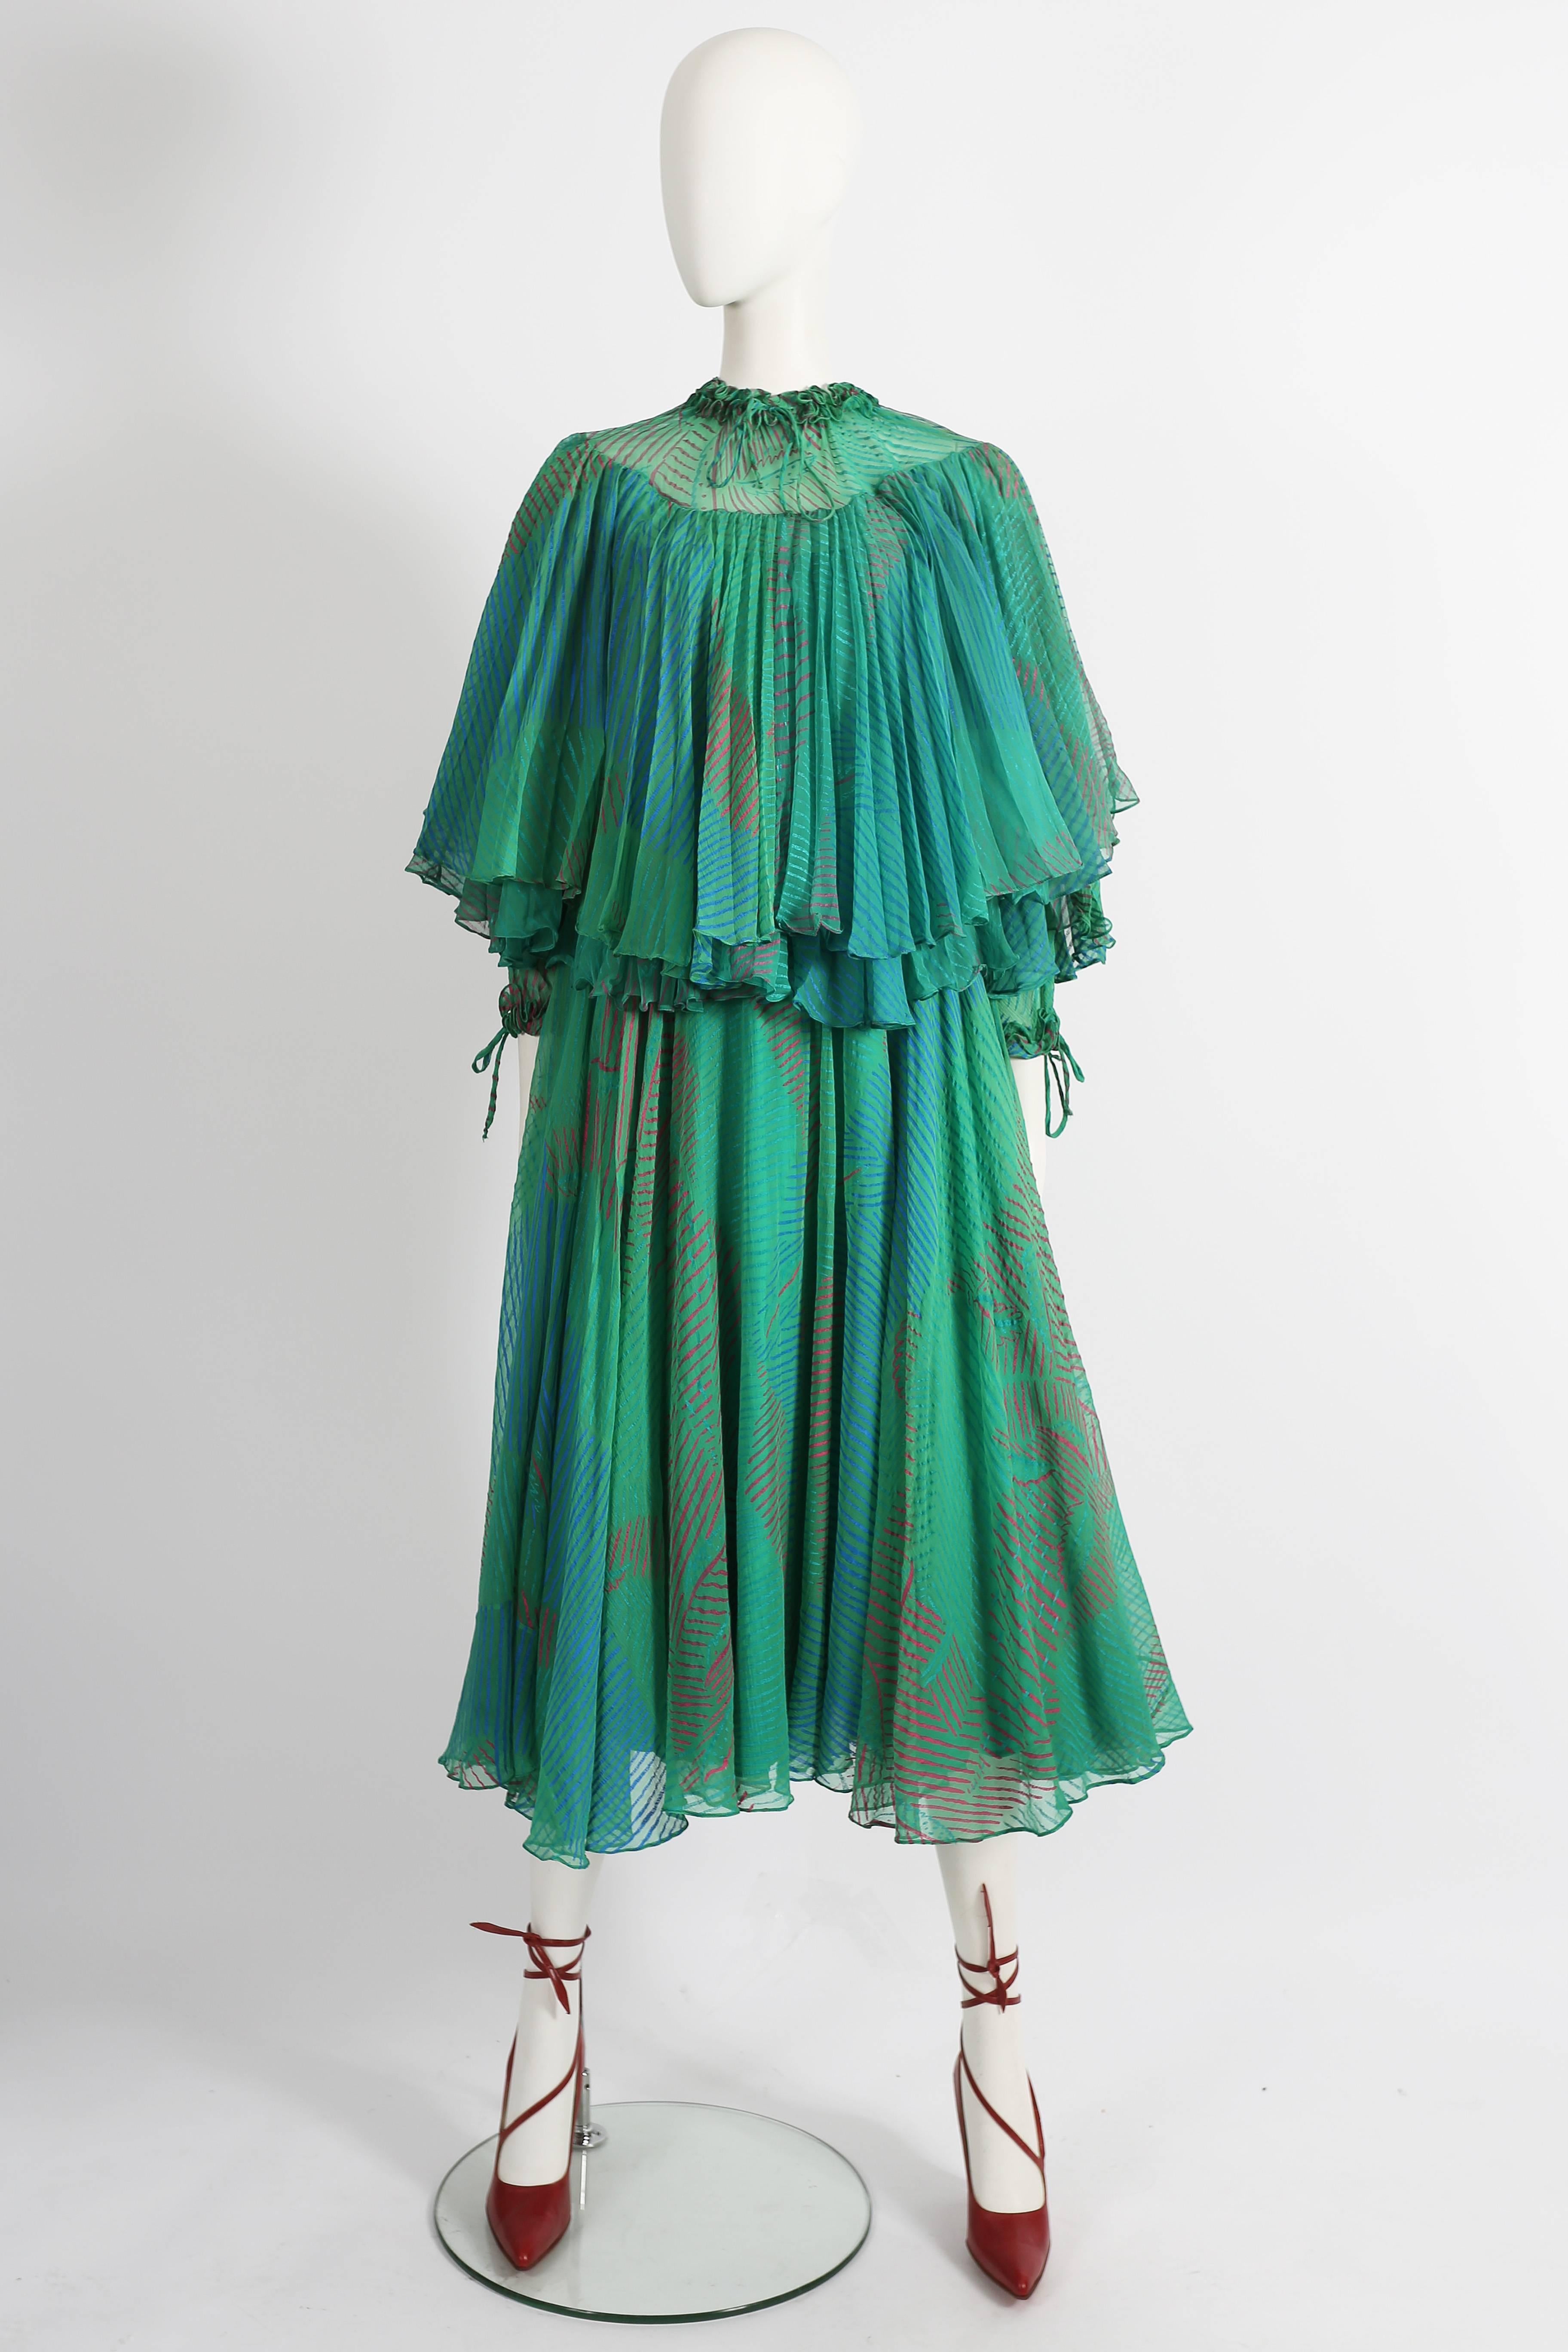 Ossie Clark and Celia Birtwell silk chiffon evening dress, couture line, circa 1976. Drawstring fastenings at neck and cuffs with ruffled trim, semi-sheer yoke, two pleated panels around the bust and full skirt with silk lining. 

The dress is